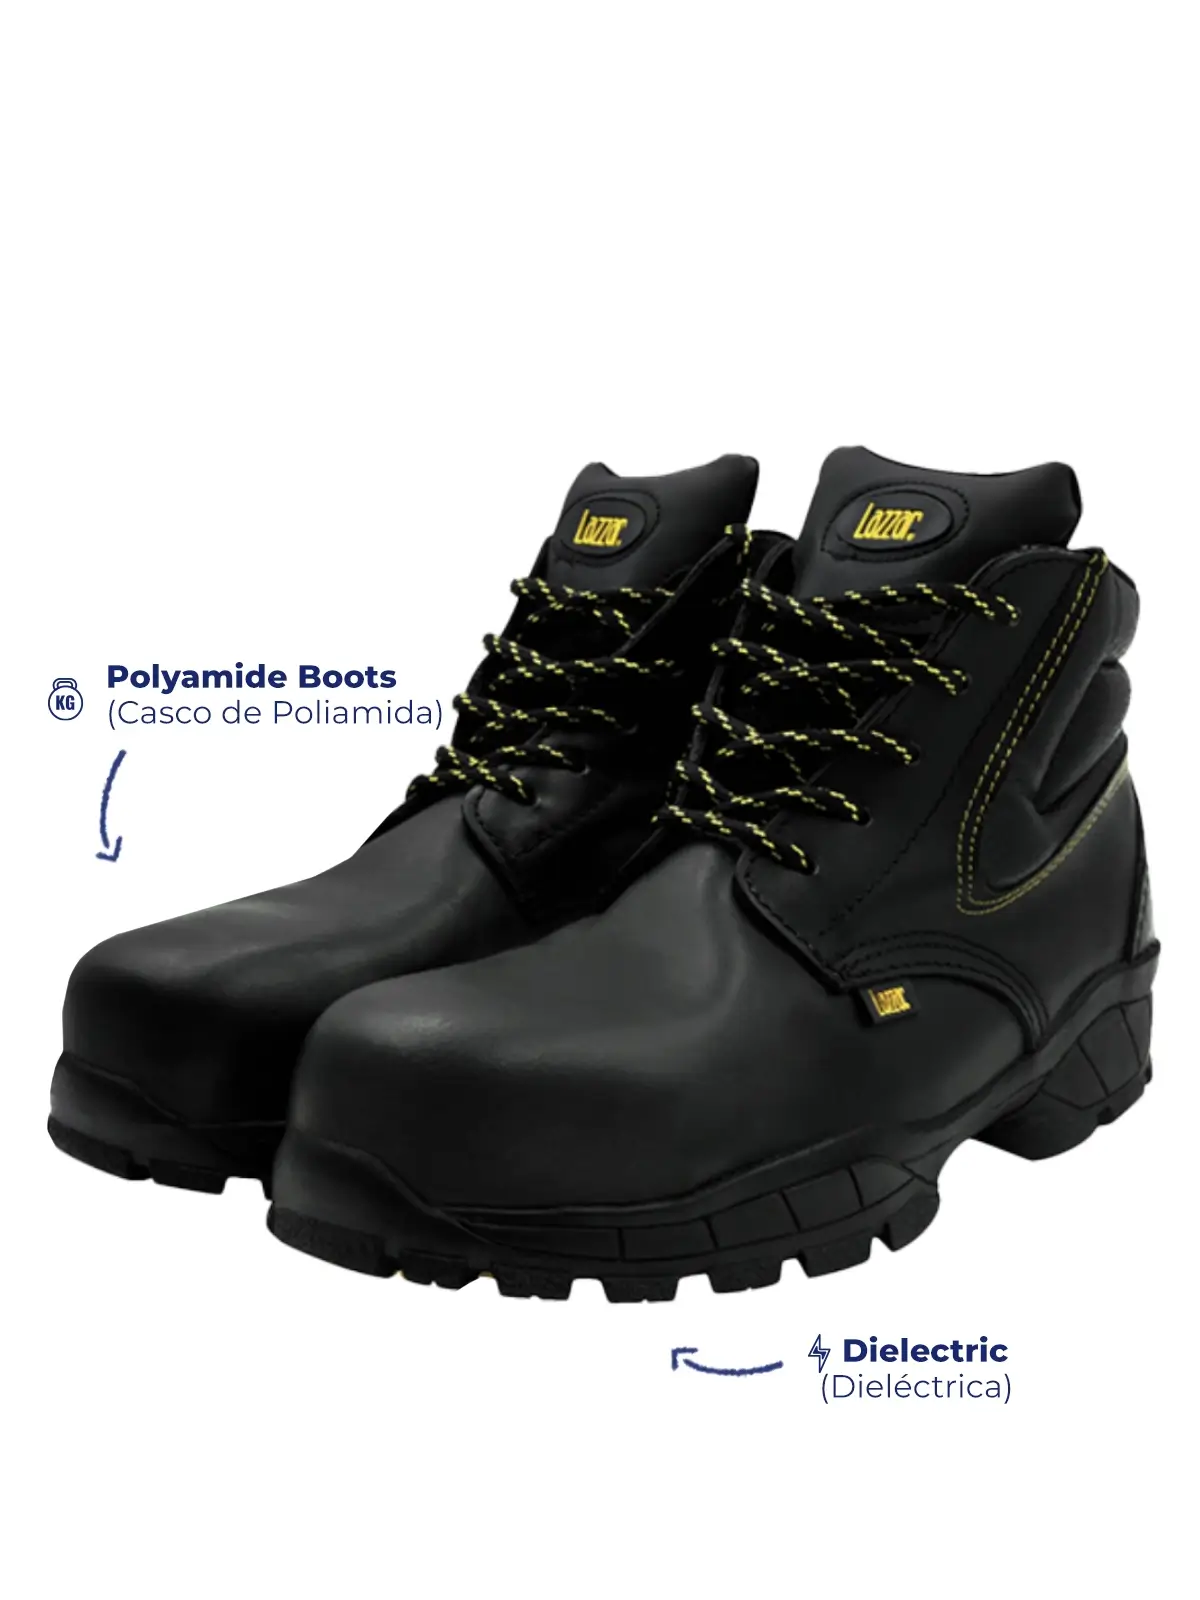 Dielectric work boots